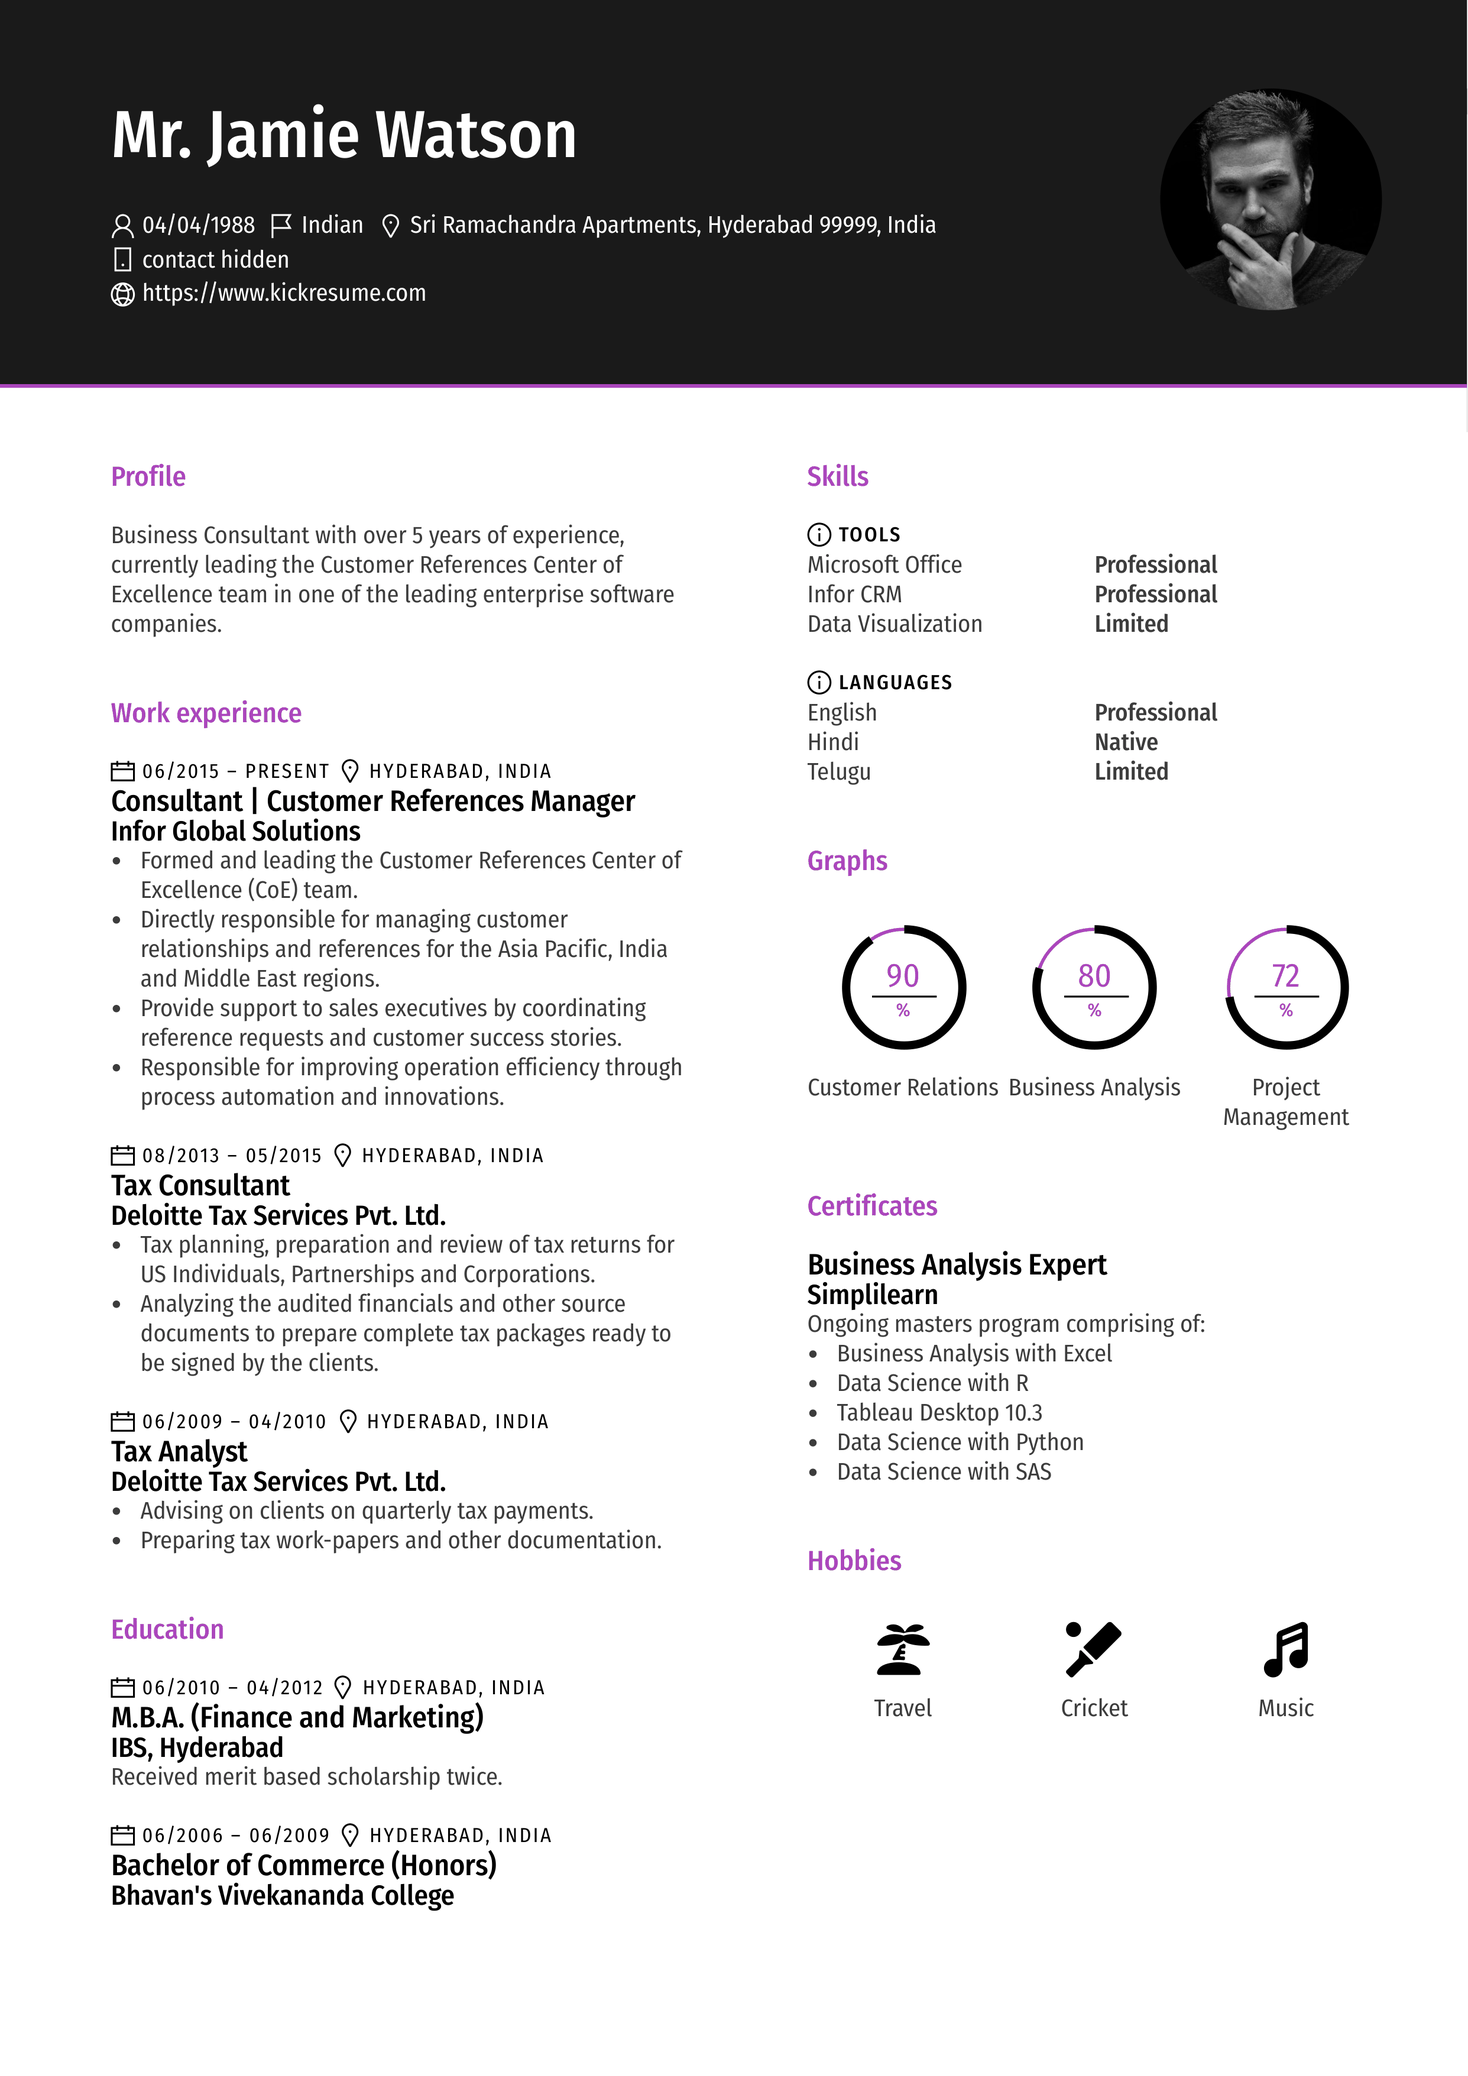 Marriage and Family Therapist Resume Sample